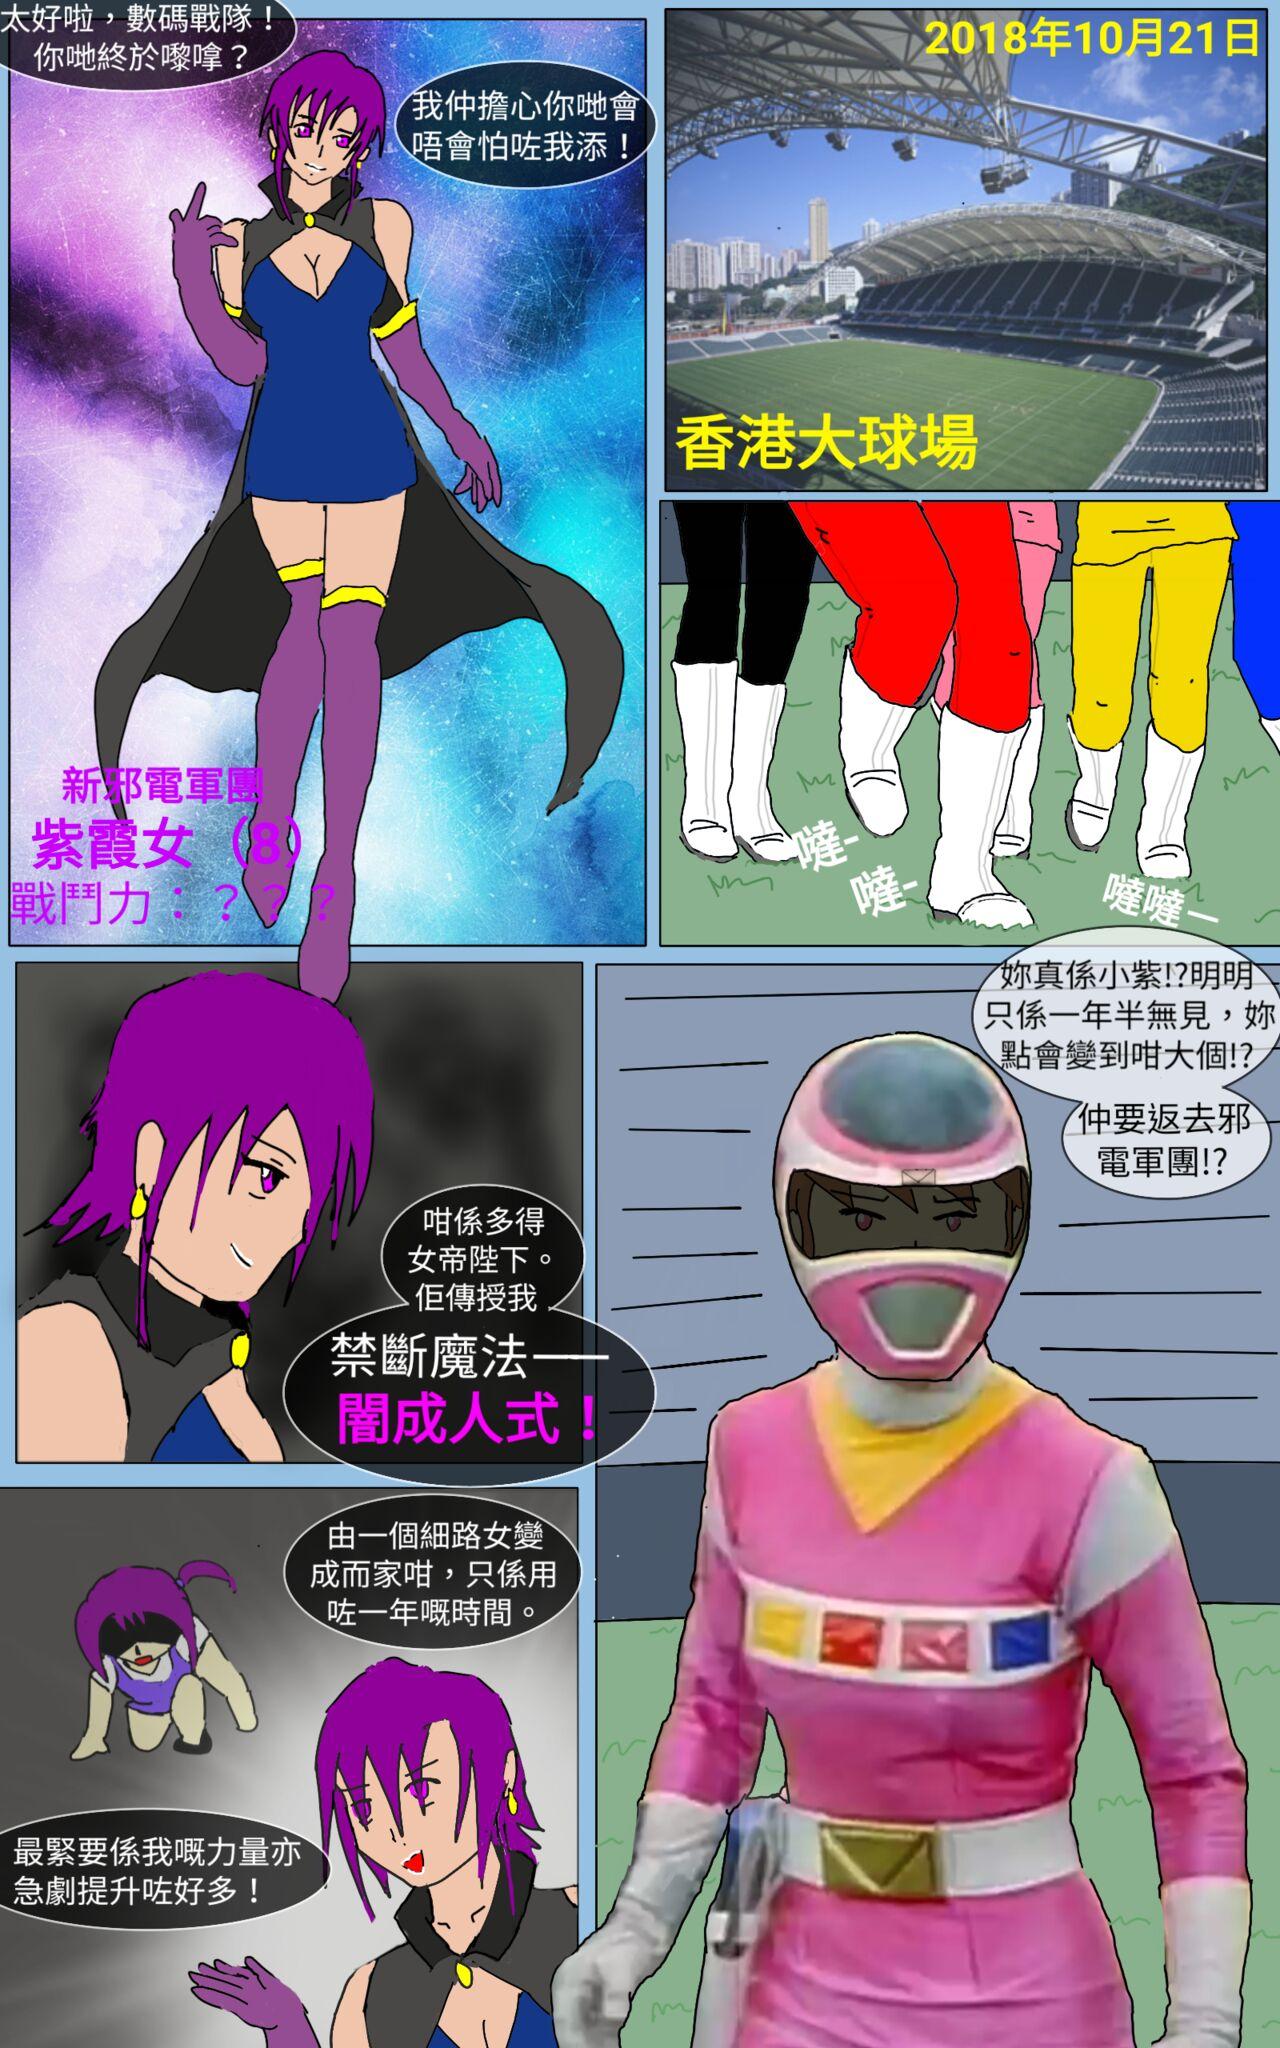 Girl Mission 13 - Super sentai Picked Up - Page 1